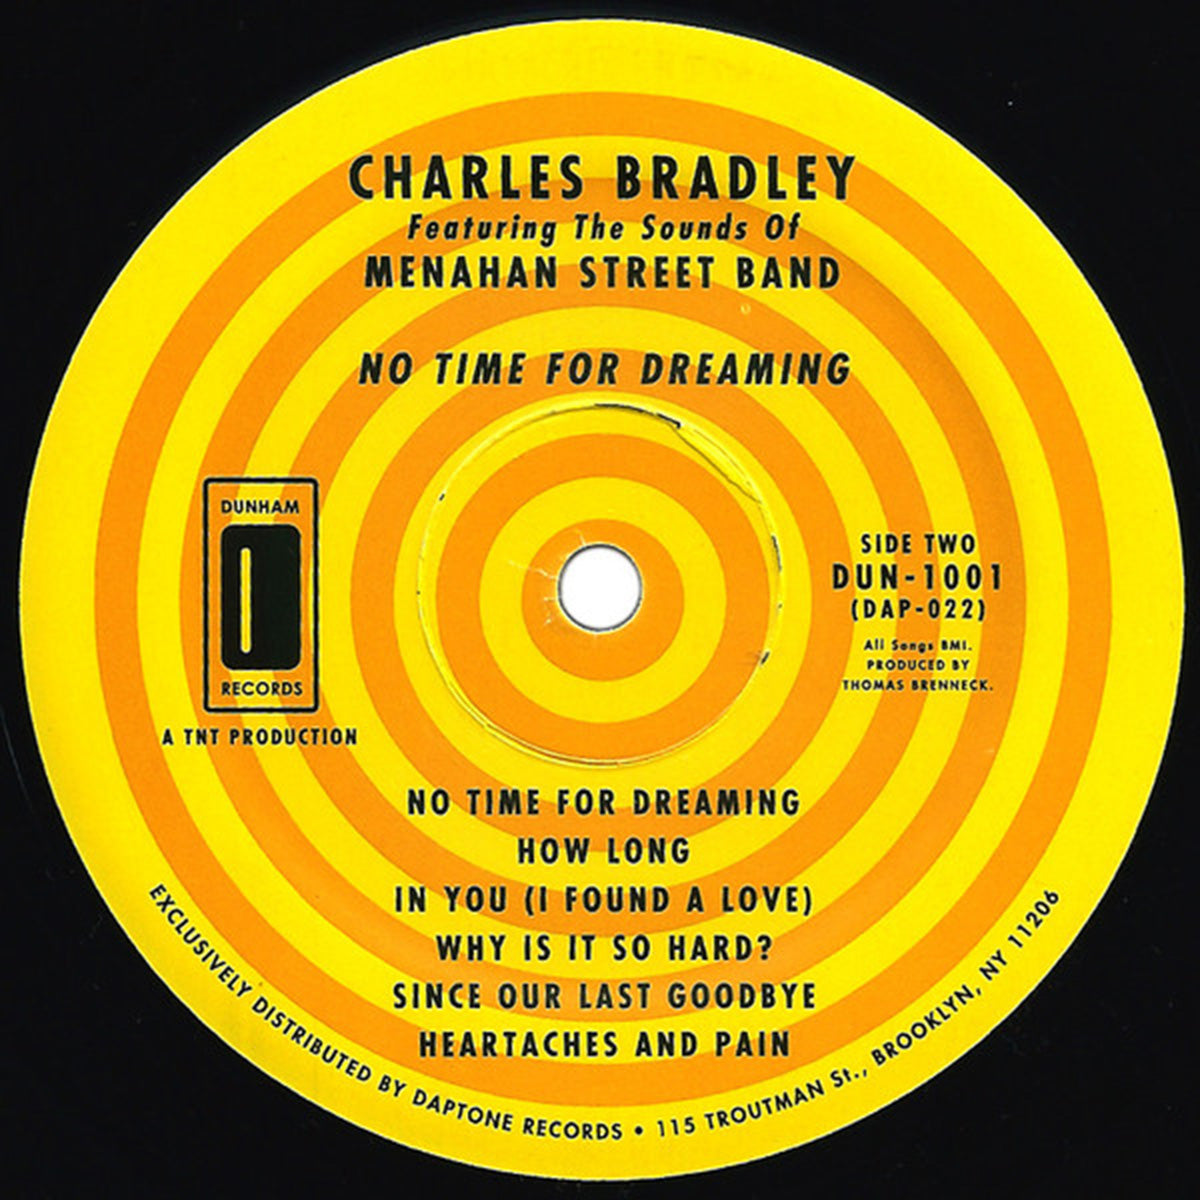 Charles Bradley Featuring The Sounds Of Menahan Street Band  - US Pressing